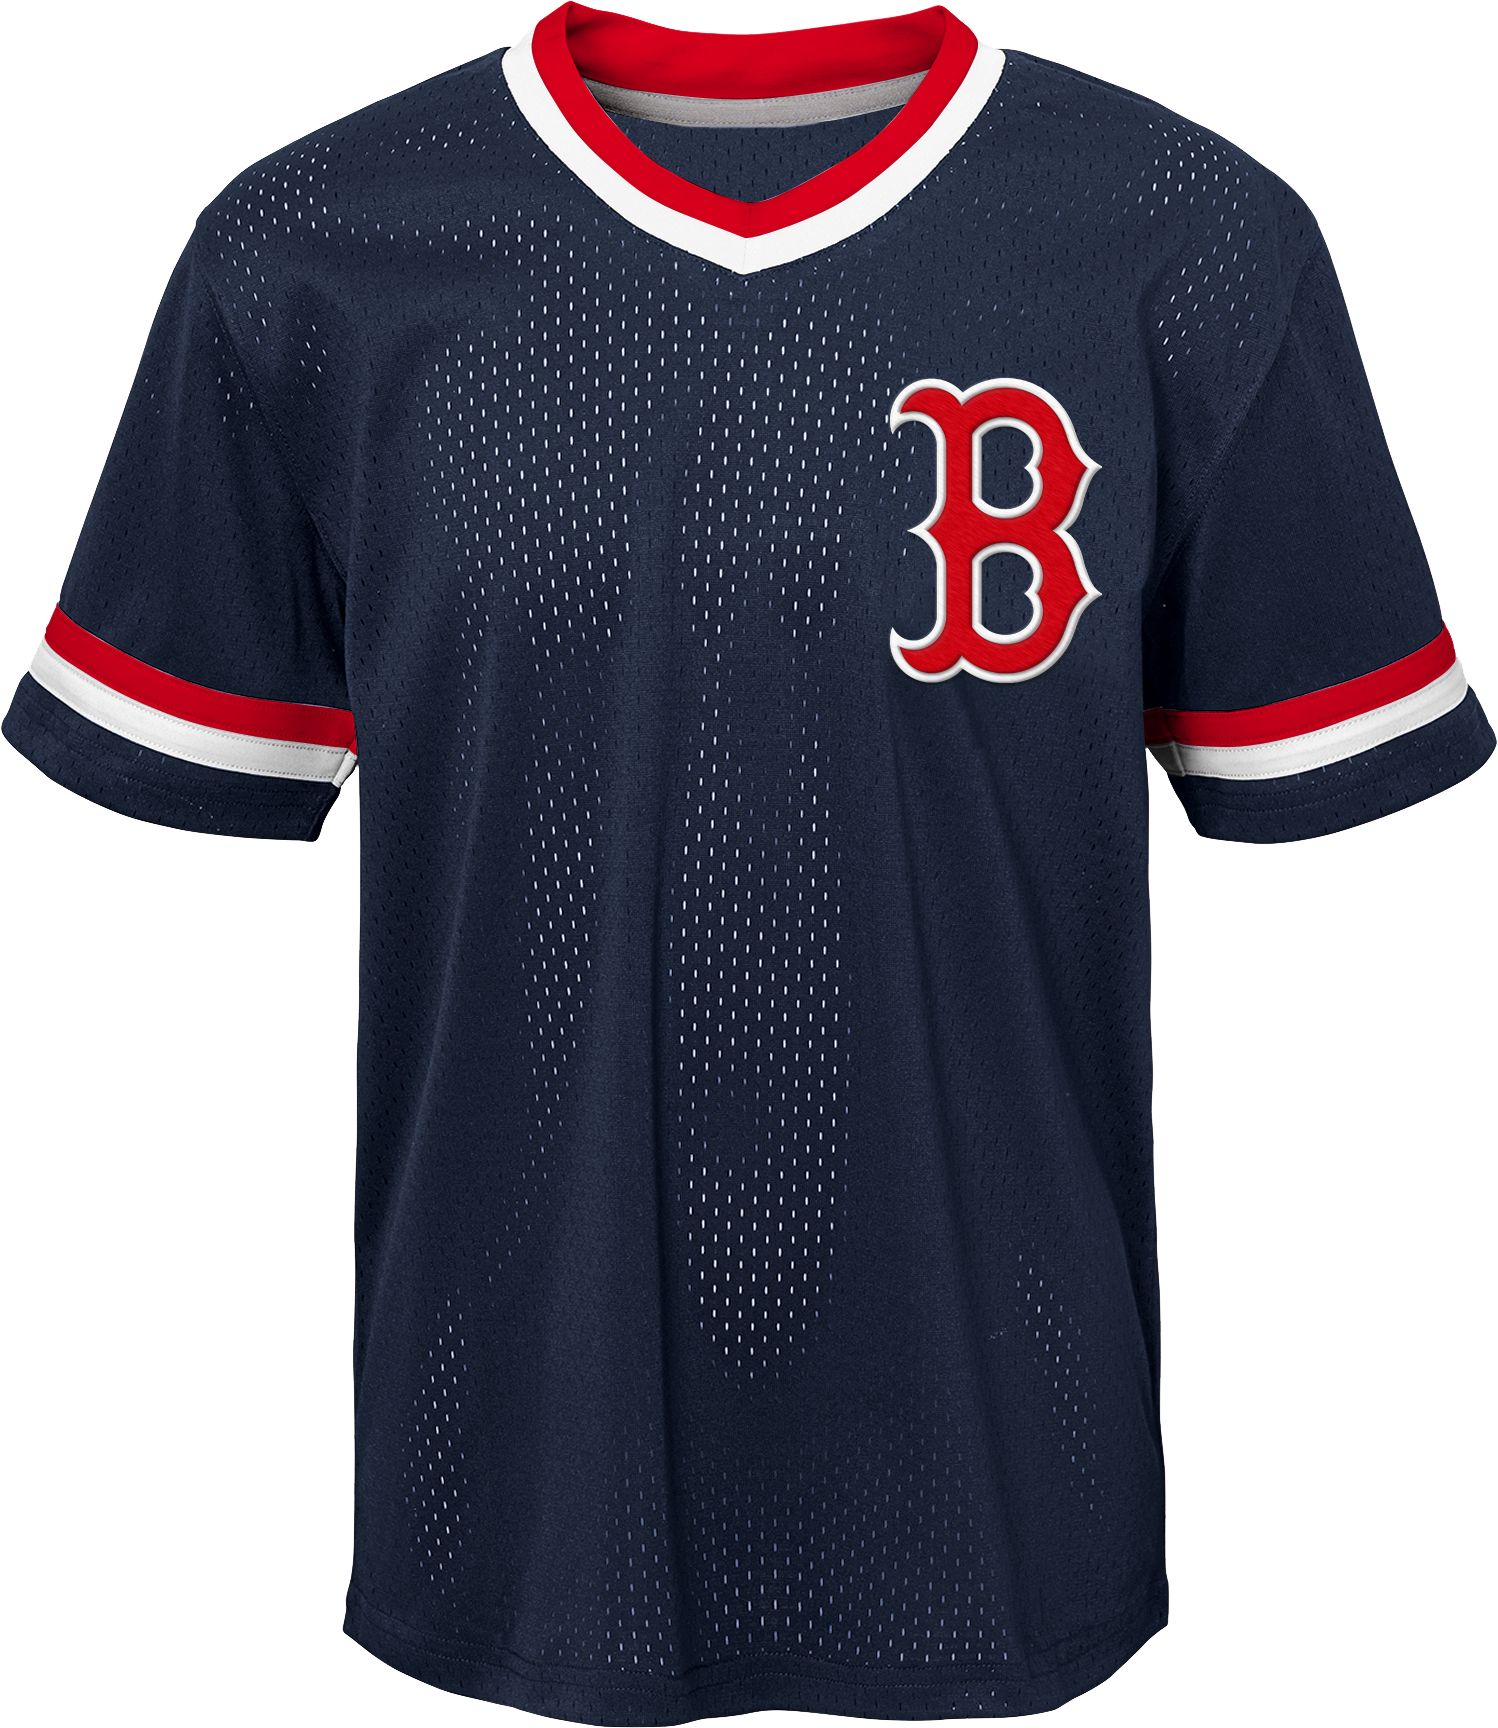 red sox jersey blue